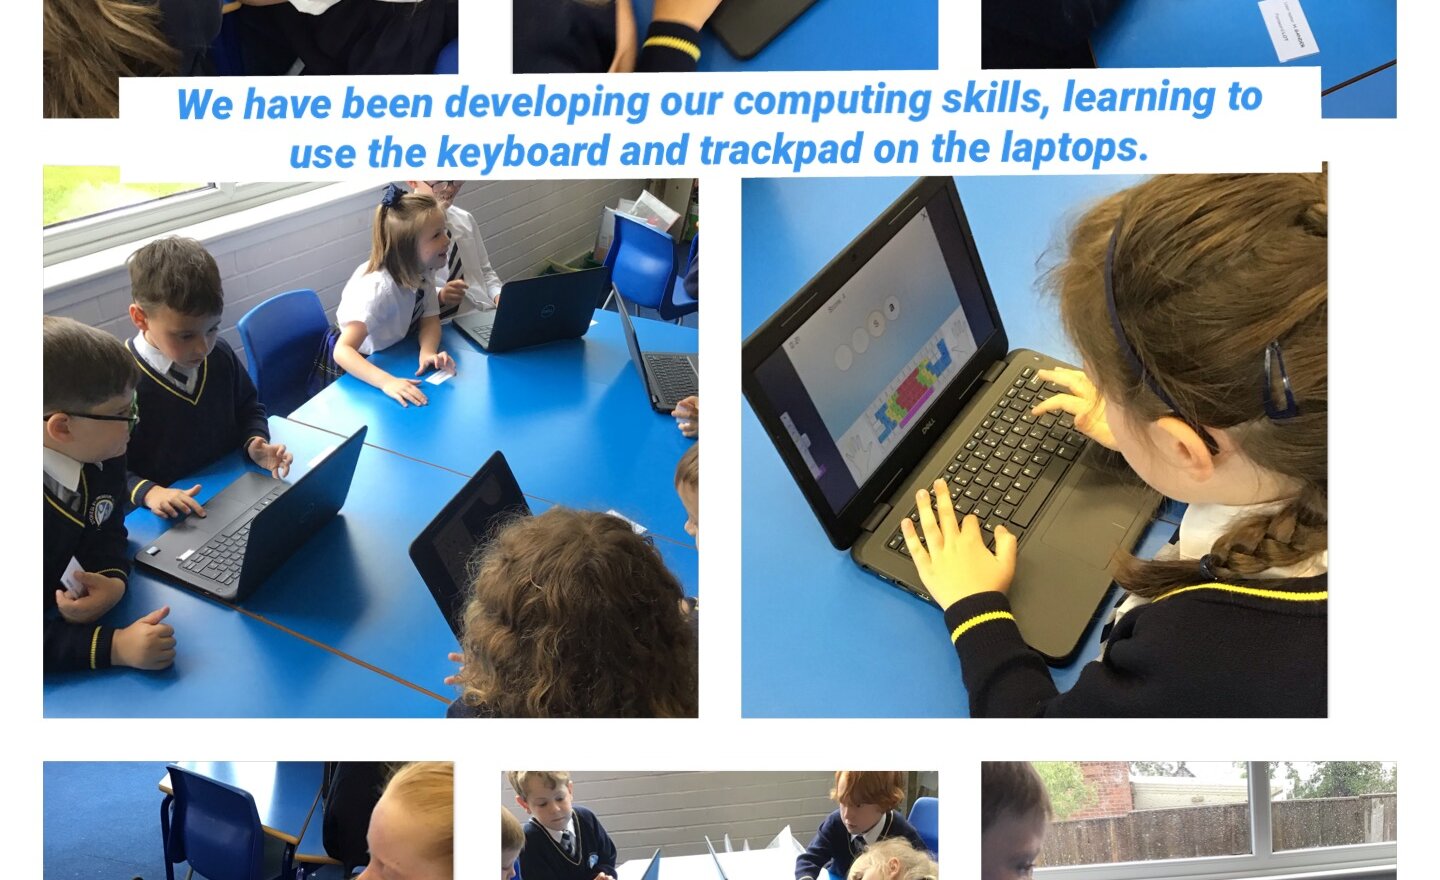 Image of Developing our computing skills